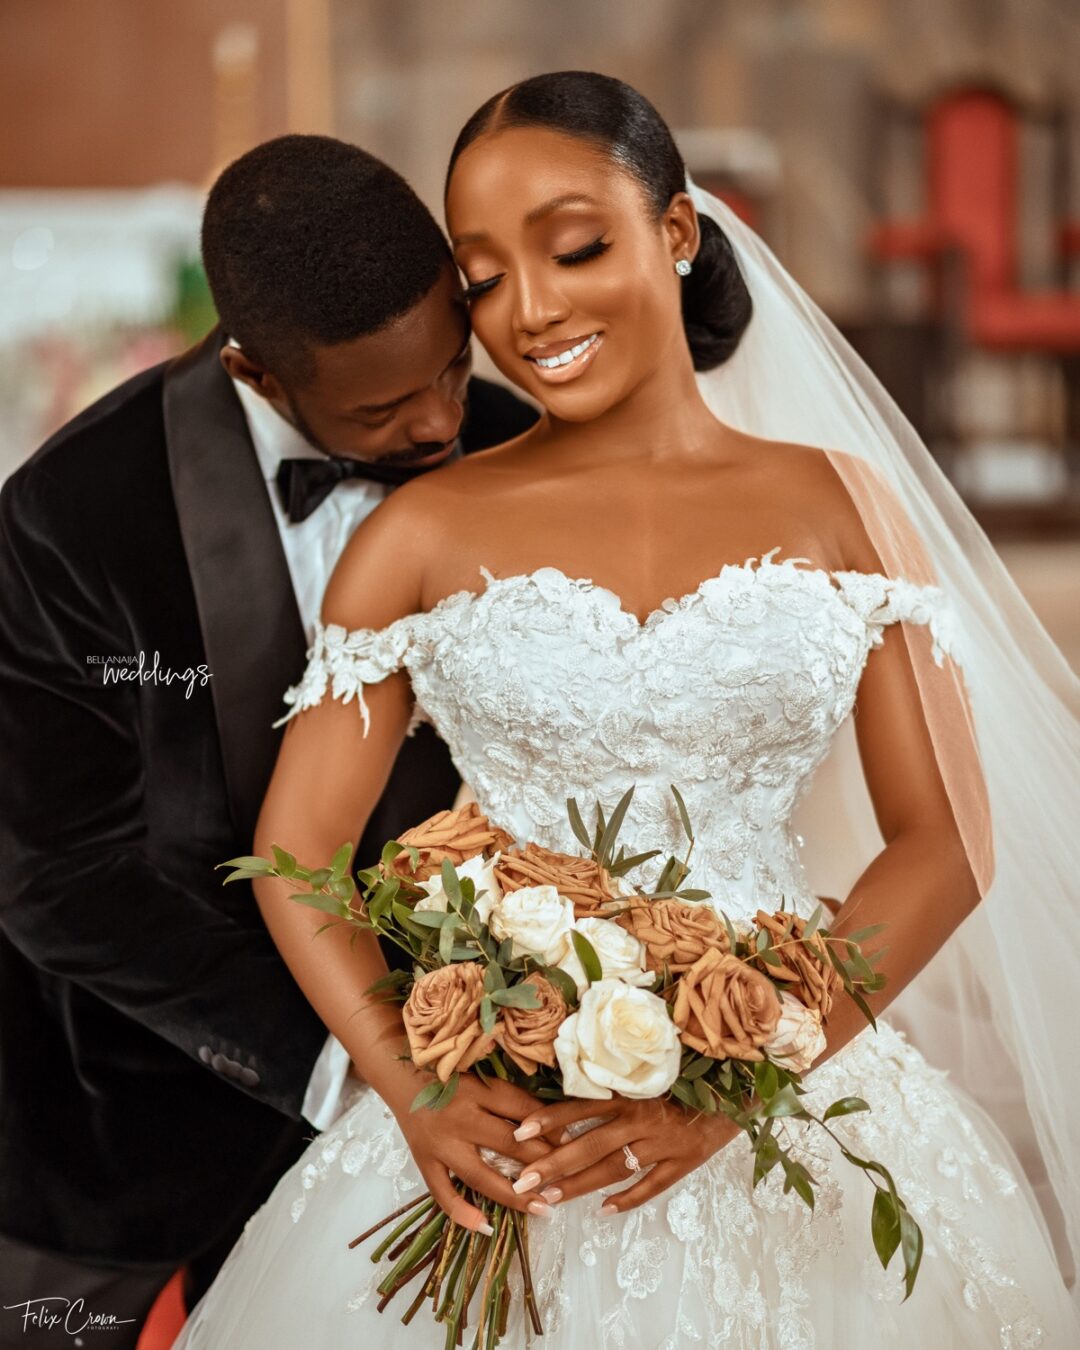 The #LoveSTory21 White Wedding in Lagos was One for the Books